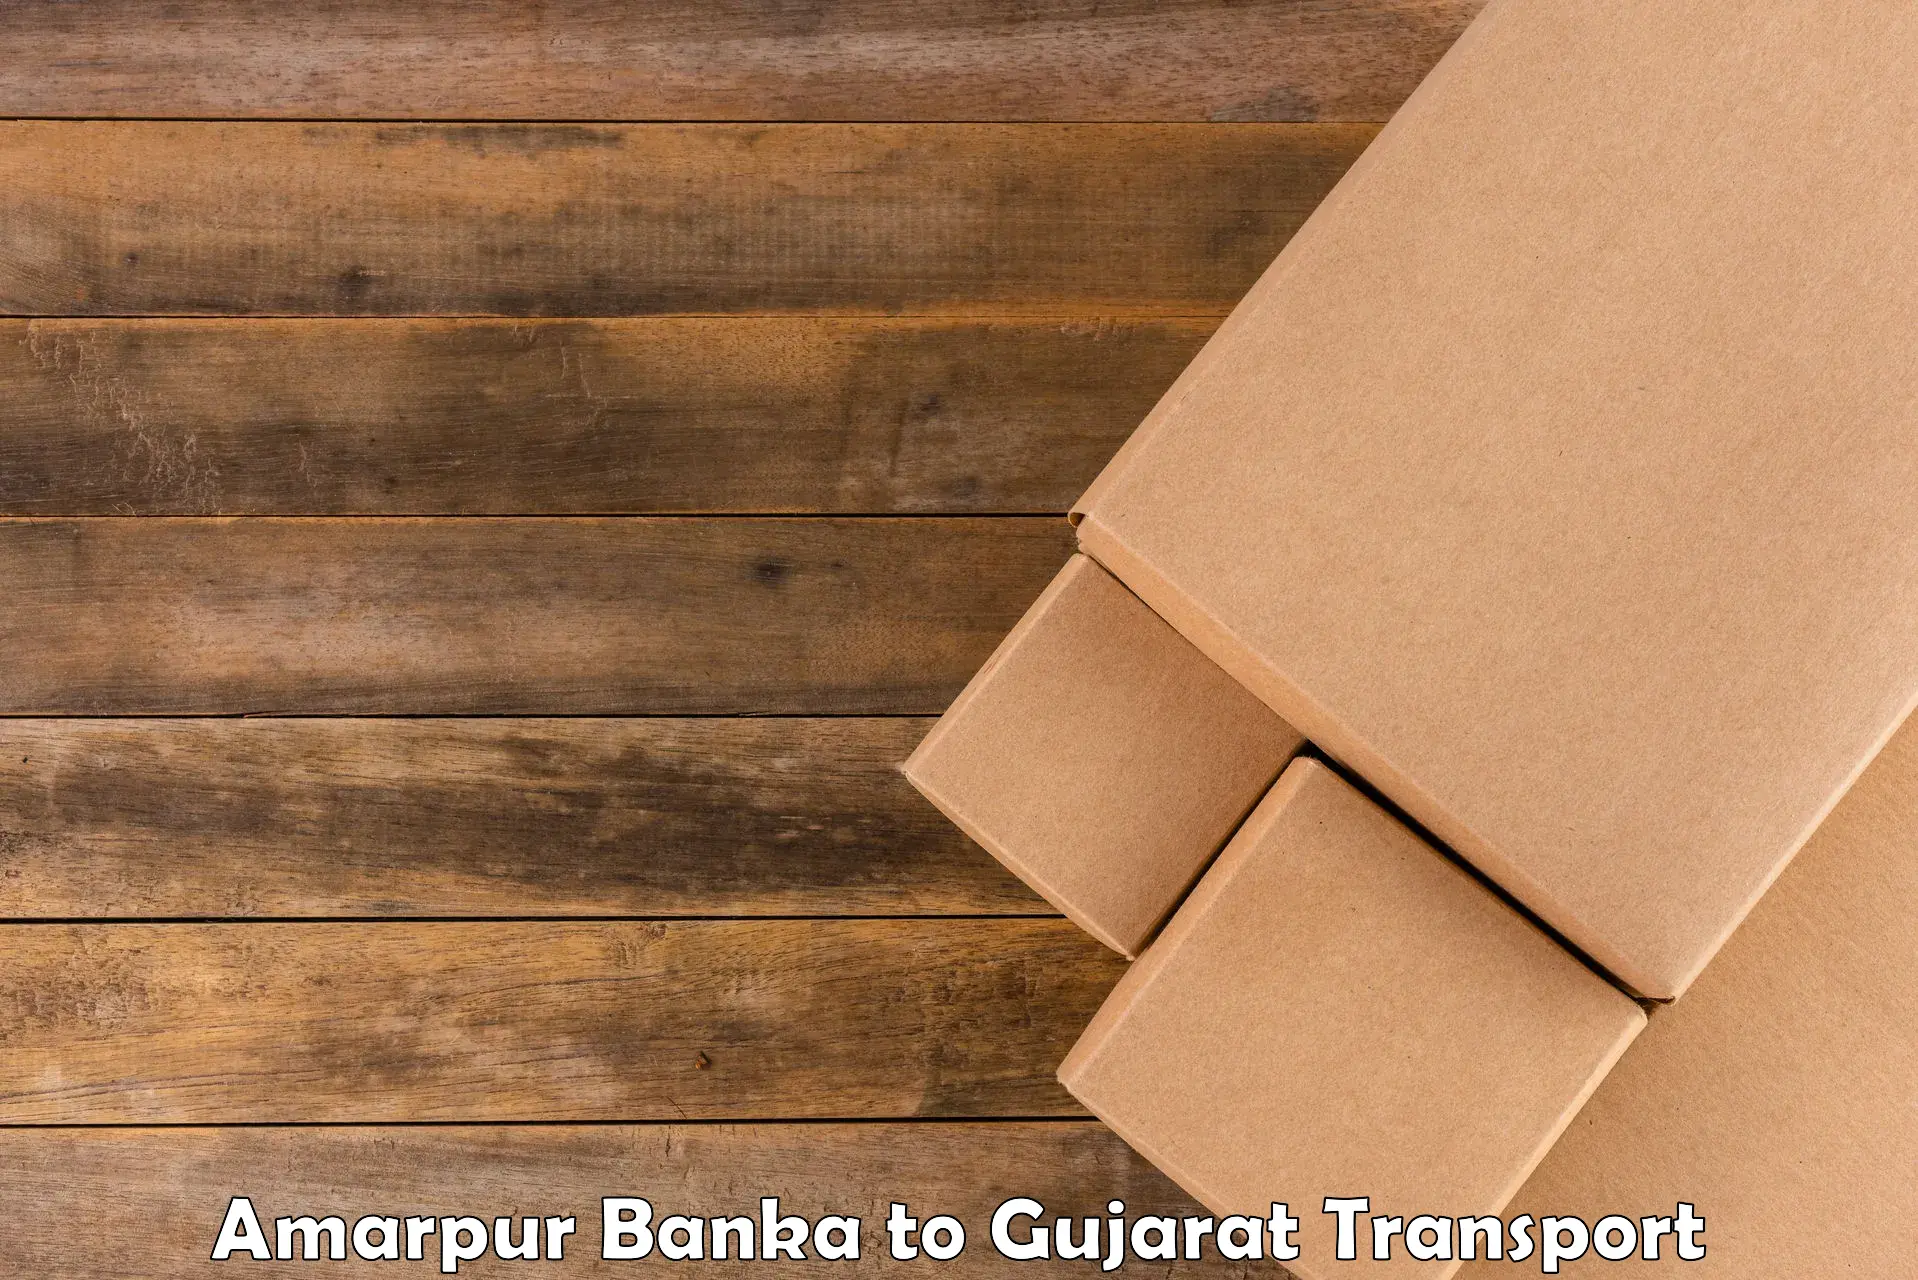 Container transport service Amarpur Banka to Anand Agricultural University